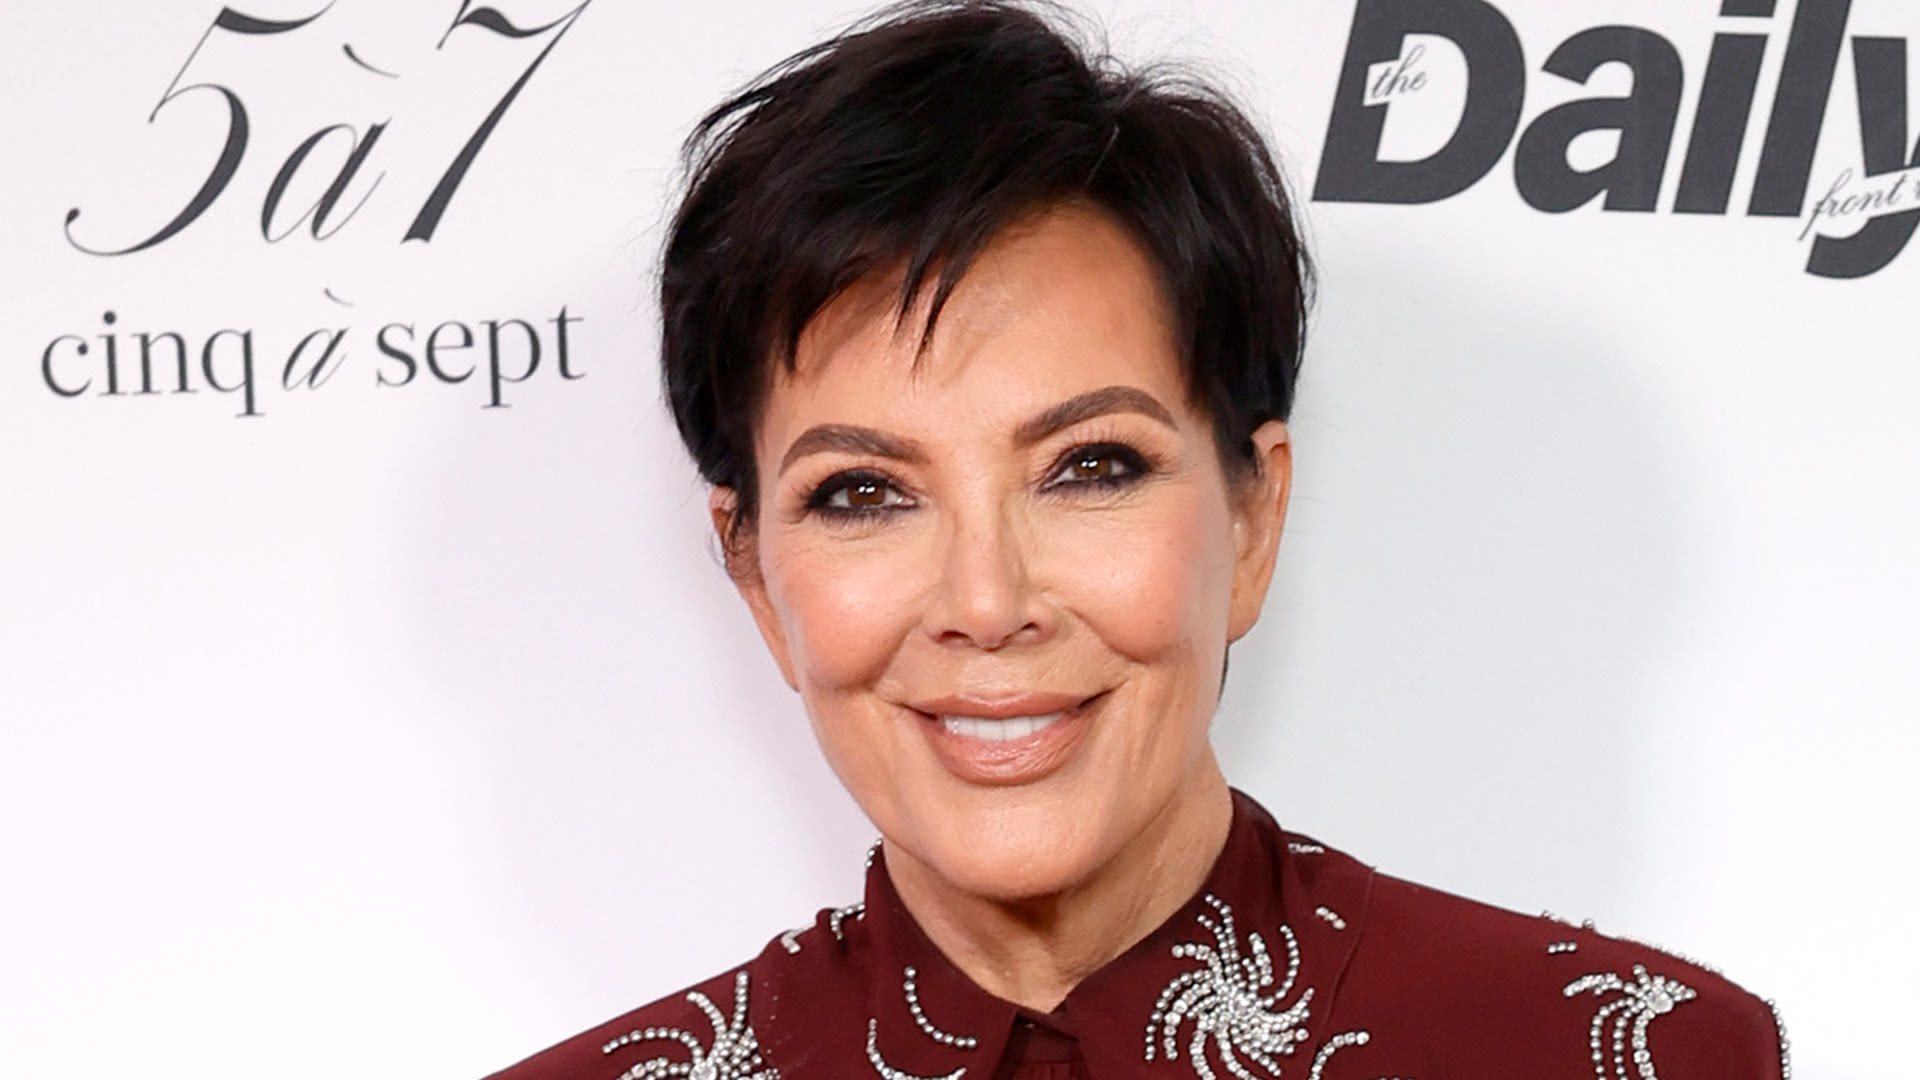 Kris Jenner fans say she looks like 'a disappearing act' after major weight loss